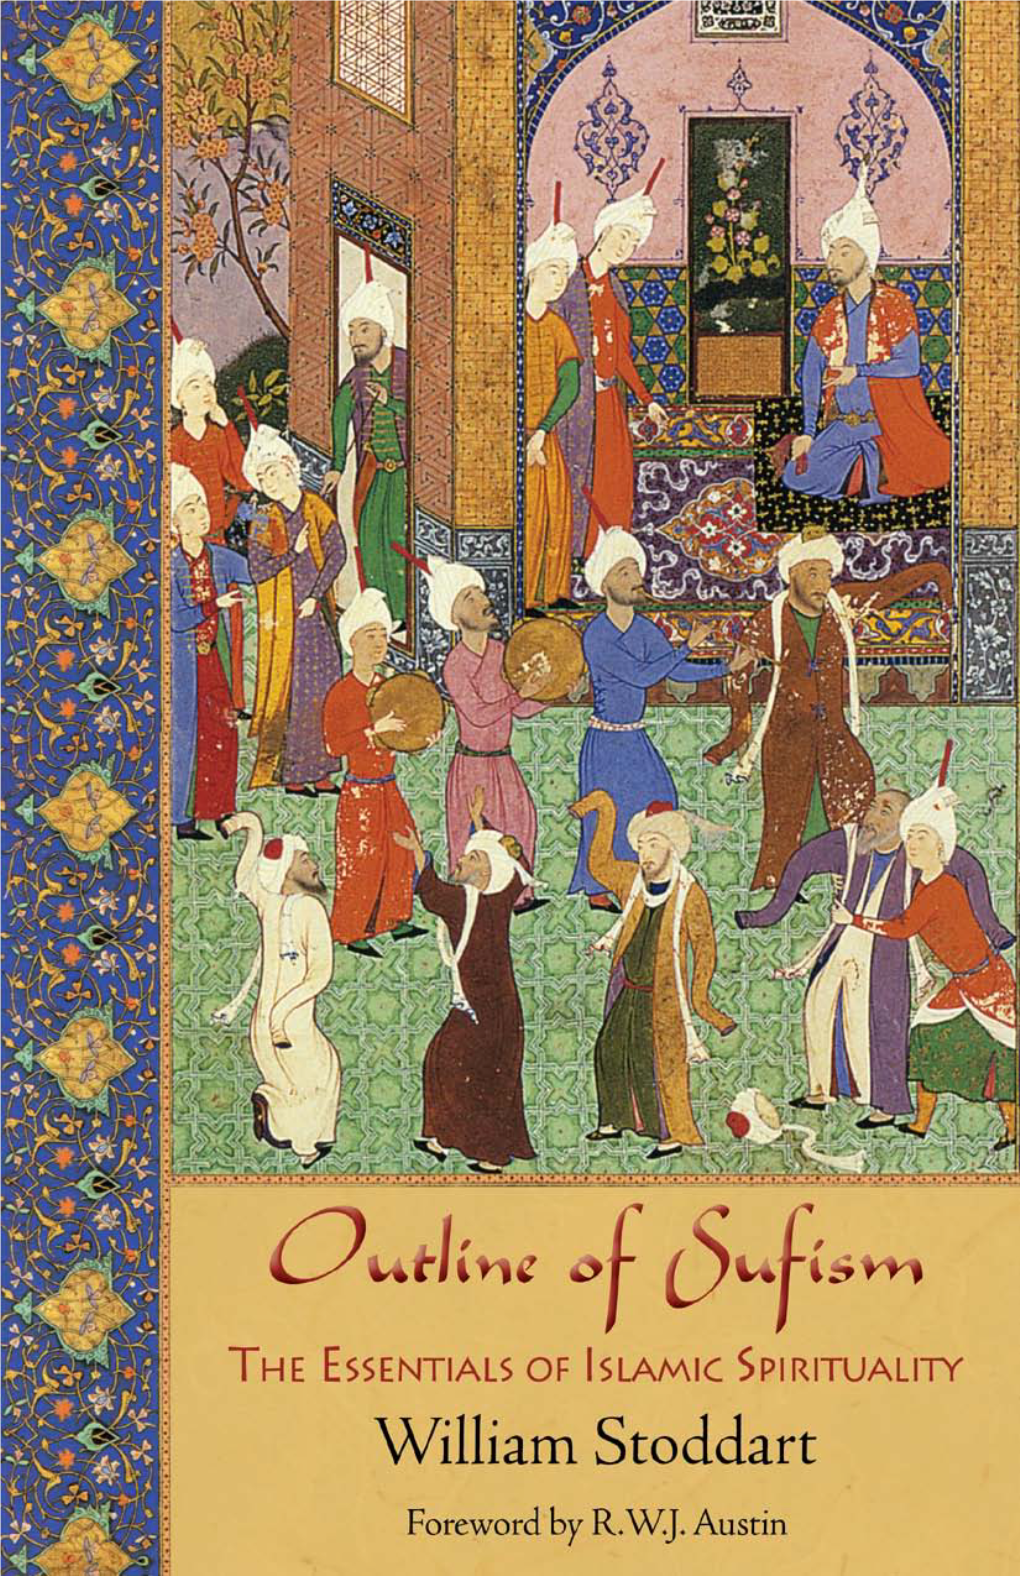 Outline of Sufism: the Essentials of Islamic Spirituality Appears As One of Our Selections in the Perennial Philosophy Series